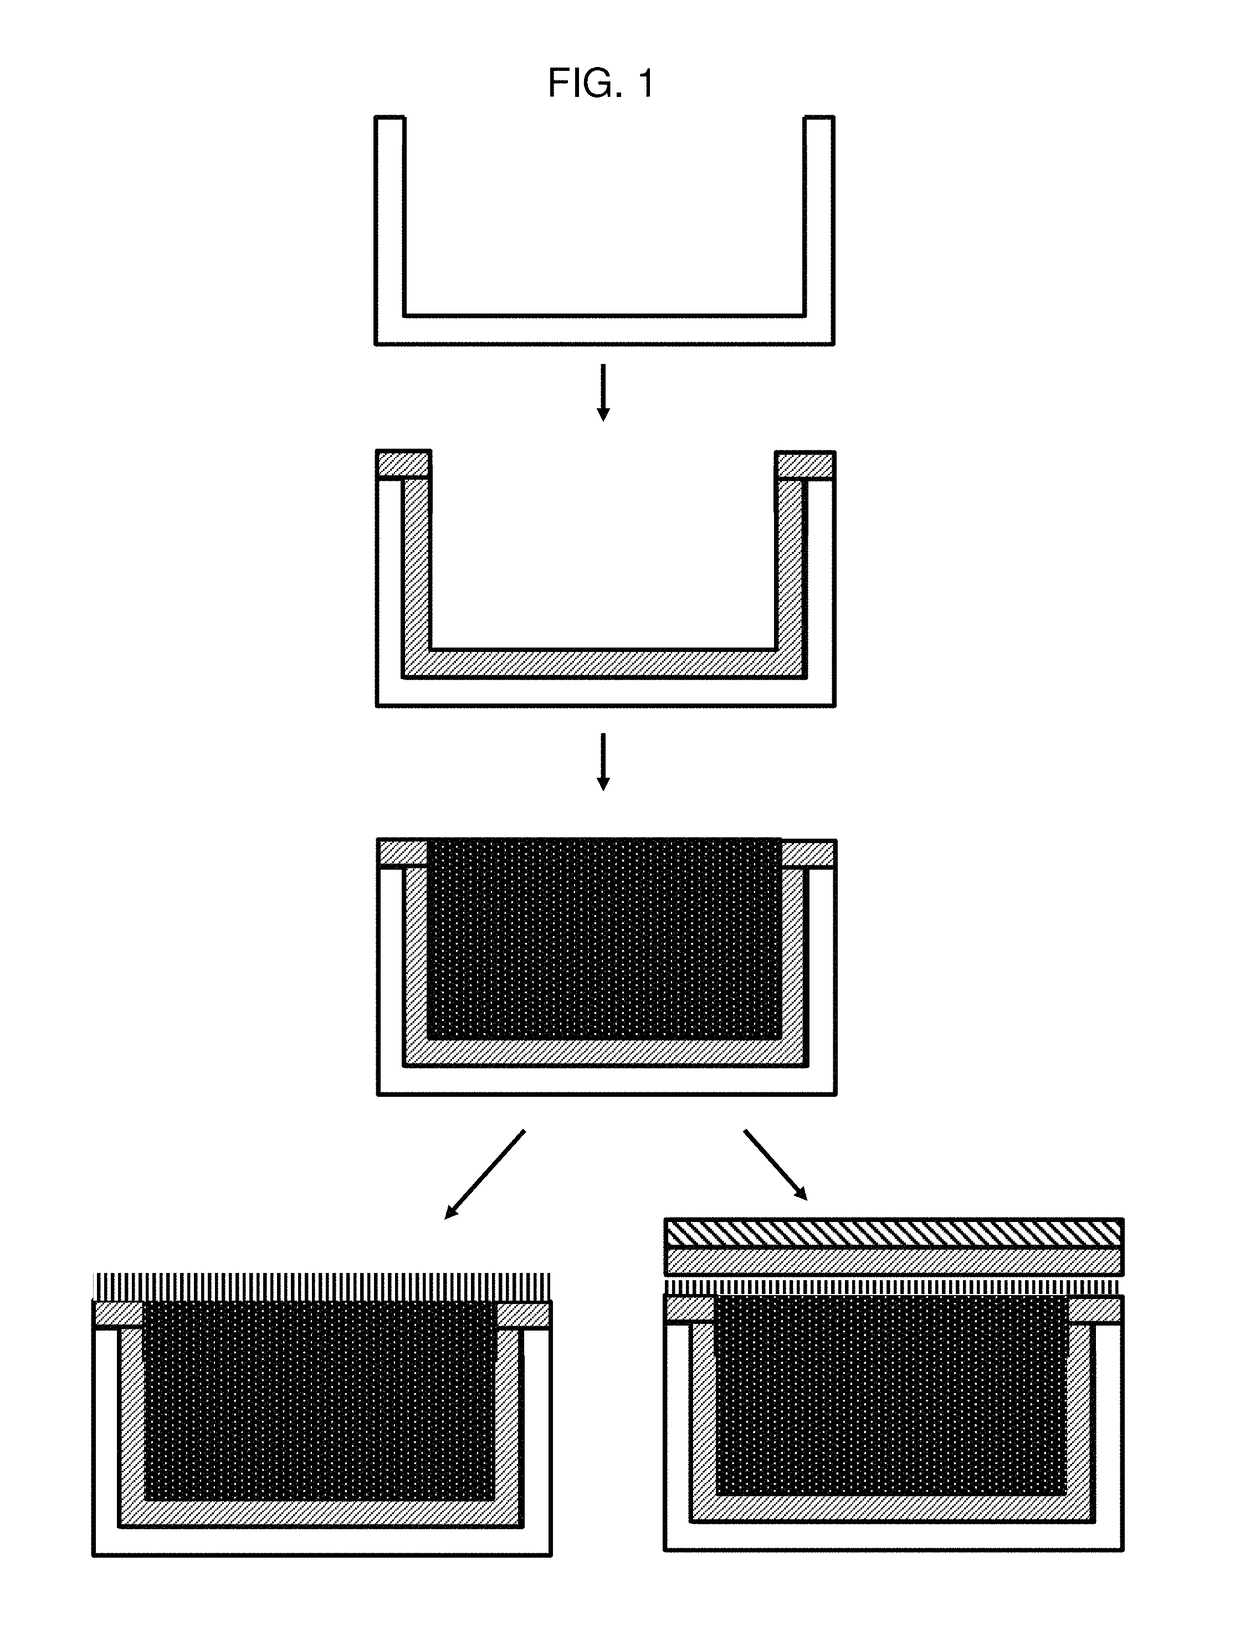 Methods for sealing microcell containers with phenethylamine mixtures